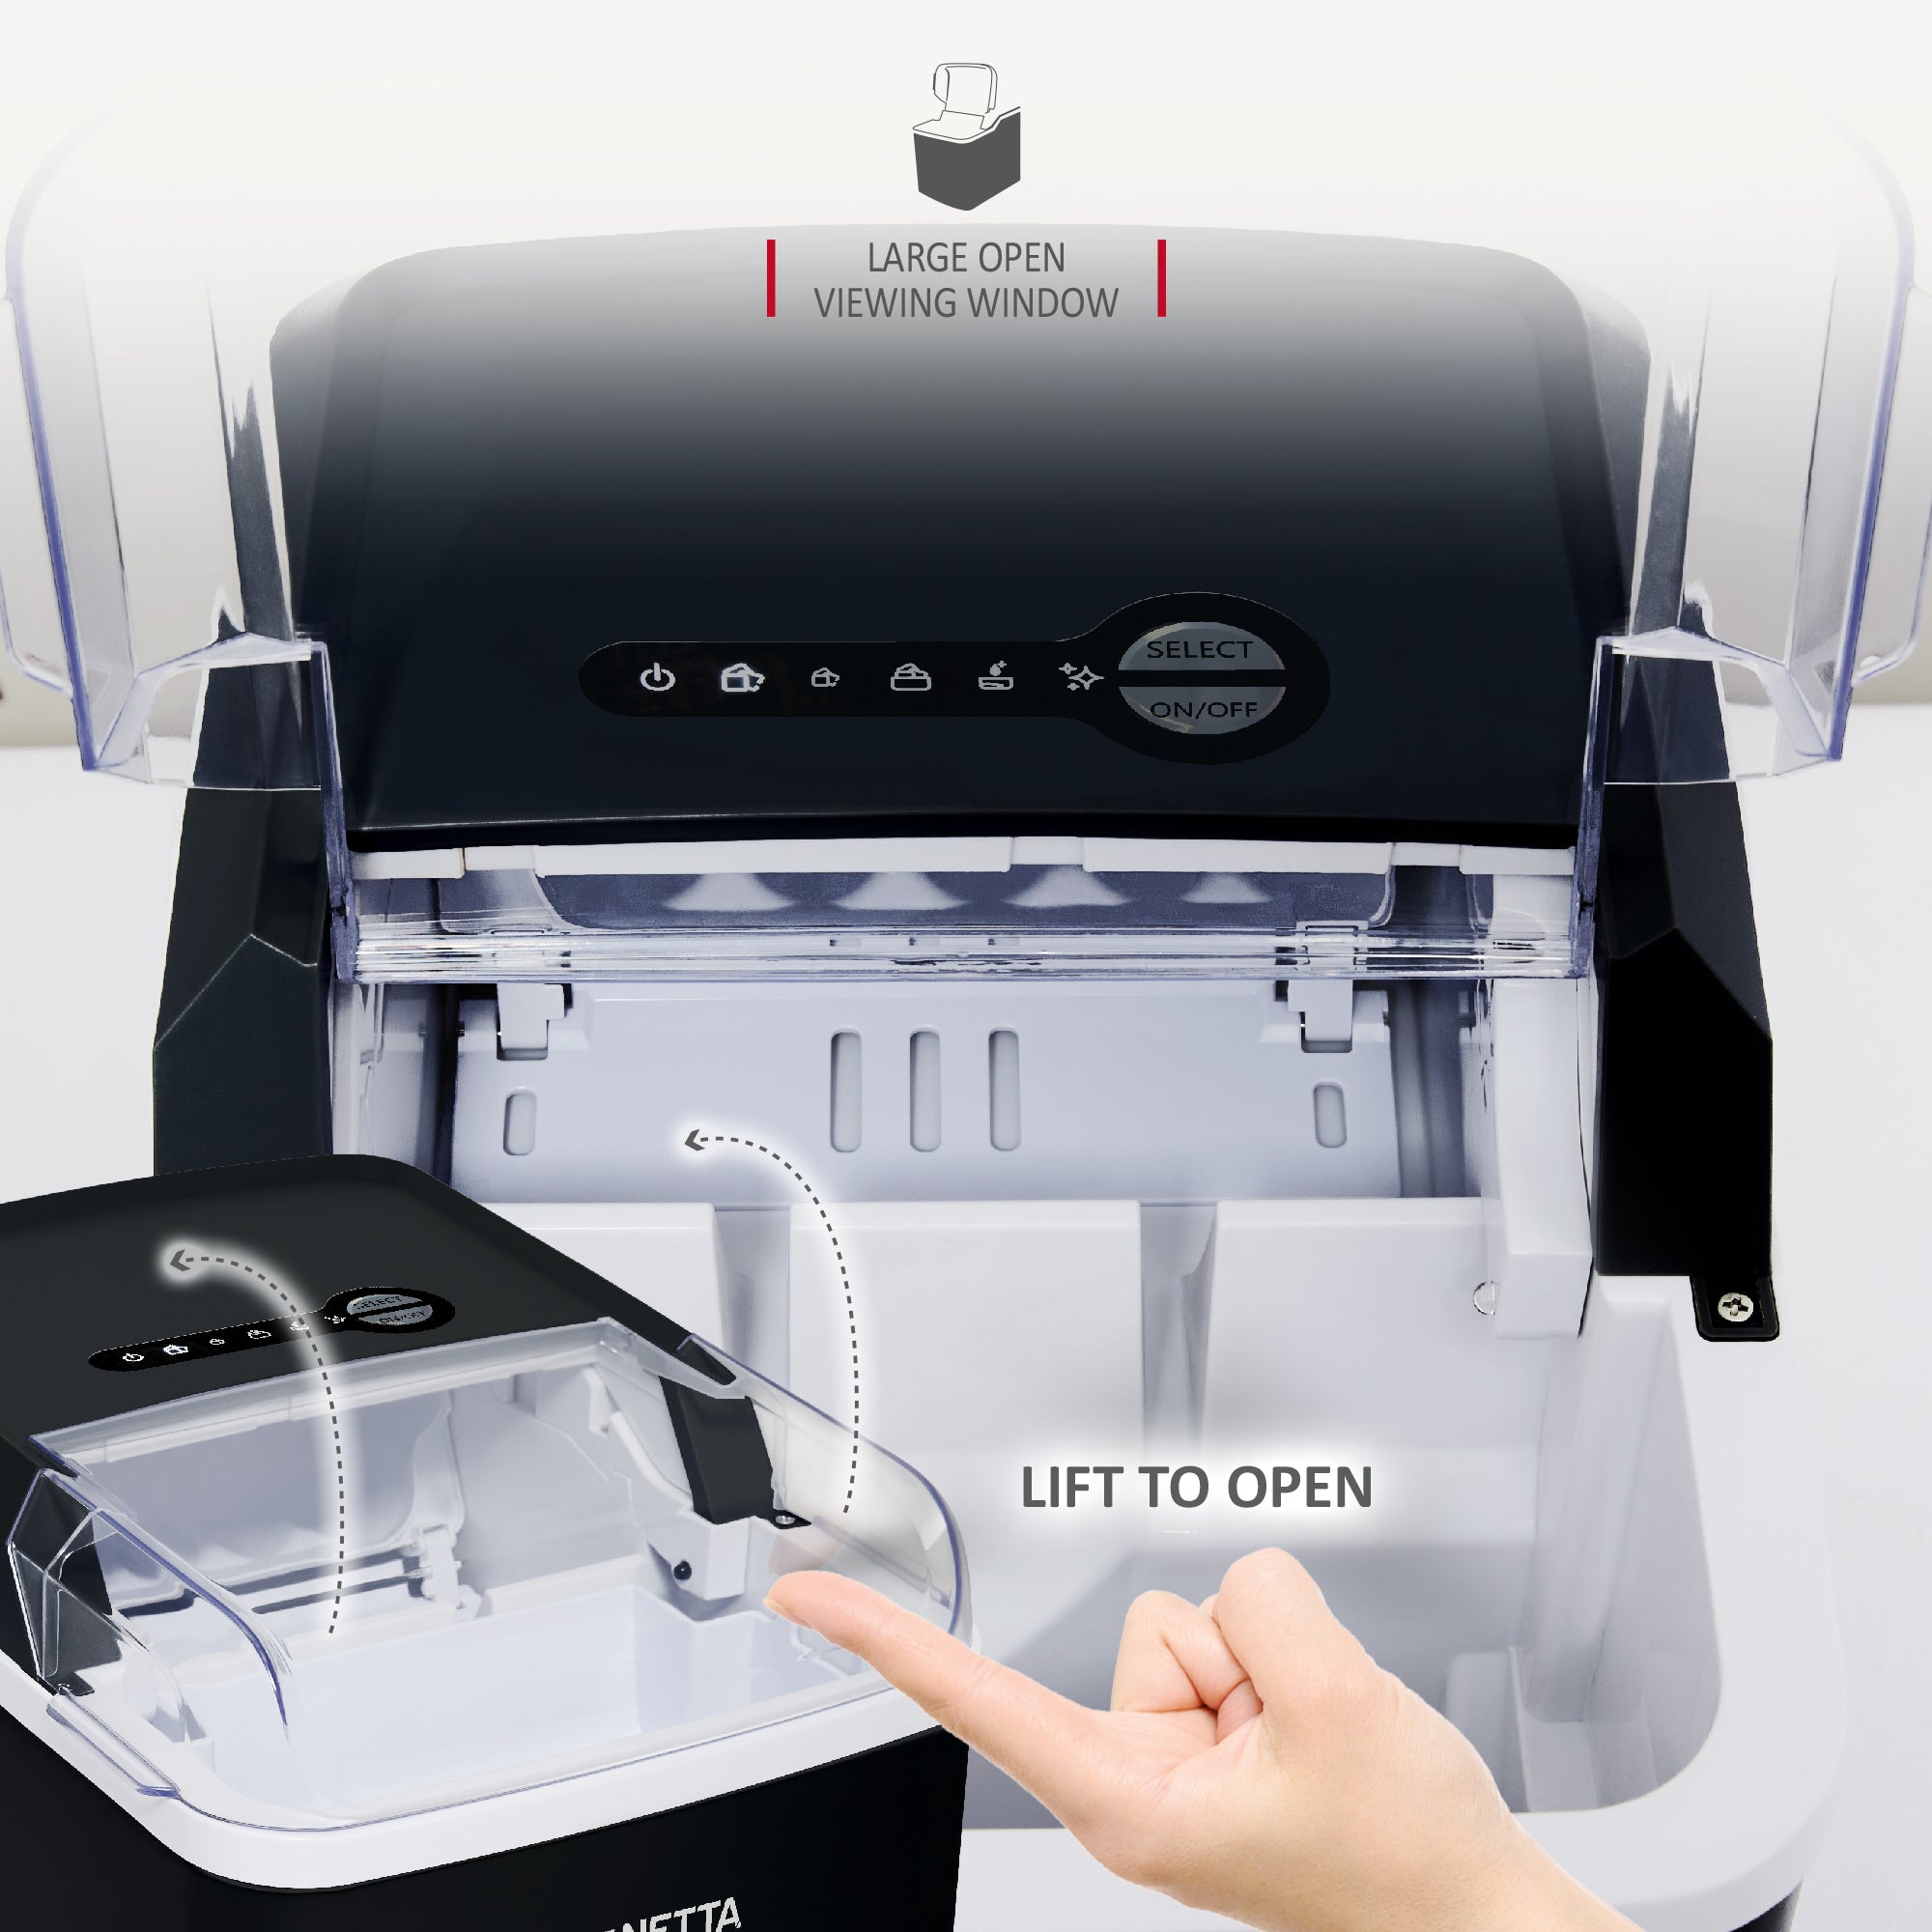 NETTA Ice Maker Machine with 1.2L Tank - Makes 12KG of Ice per Day